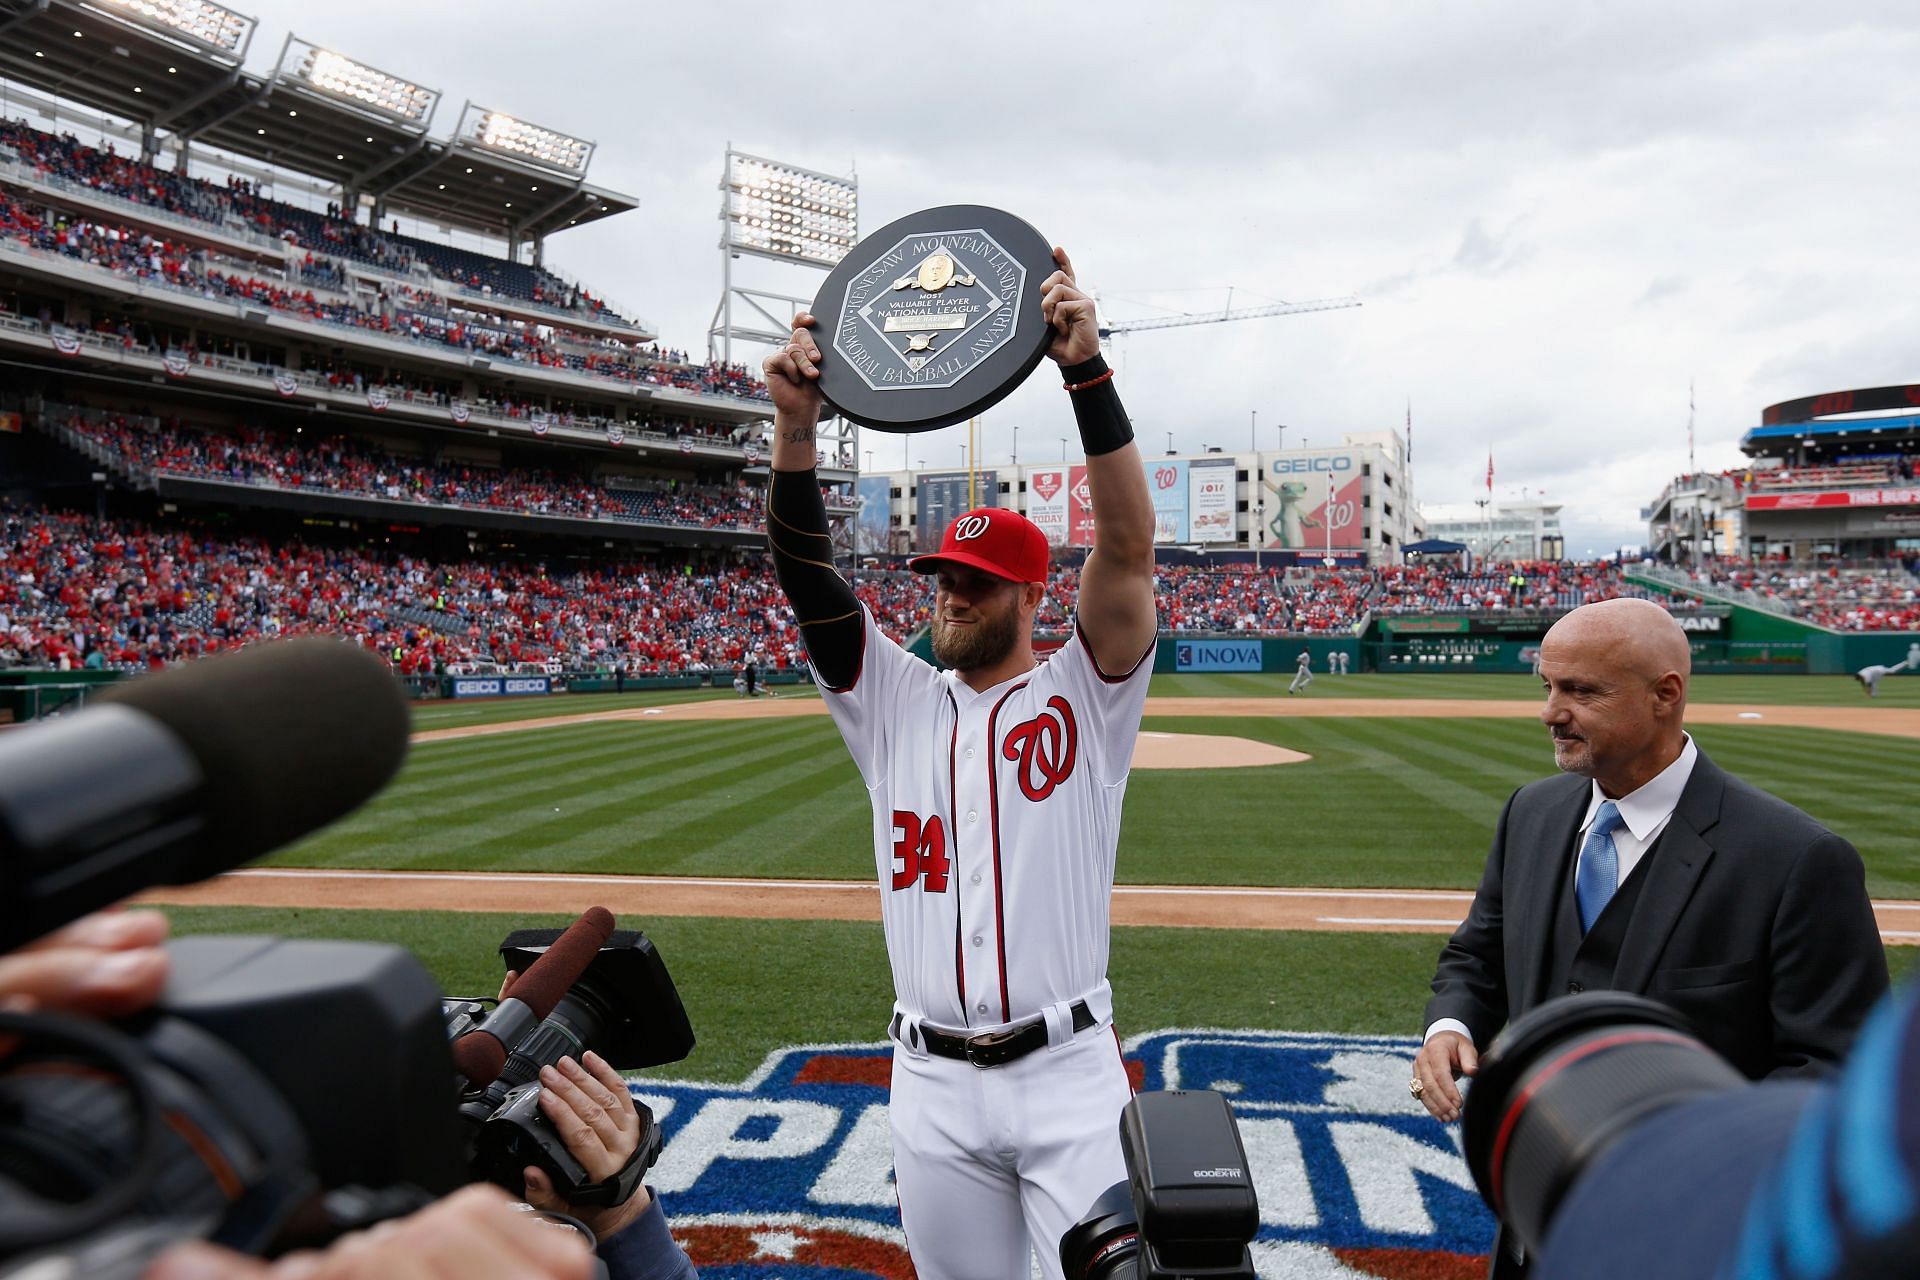 Bryce Harper of the Washington Nationals holds up the 2015 MVP trophy.